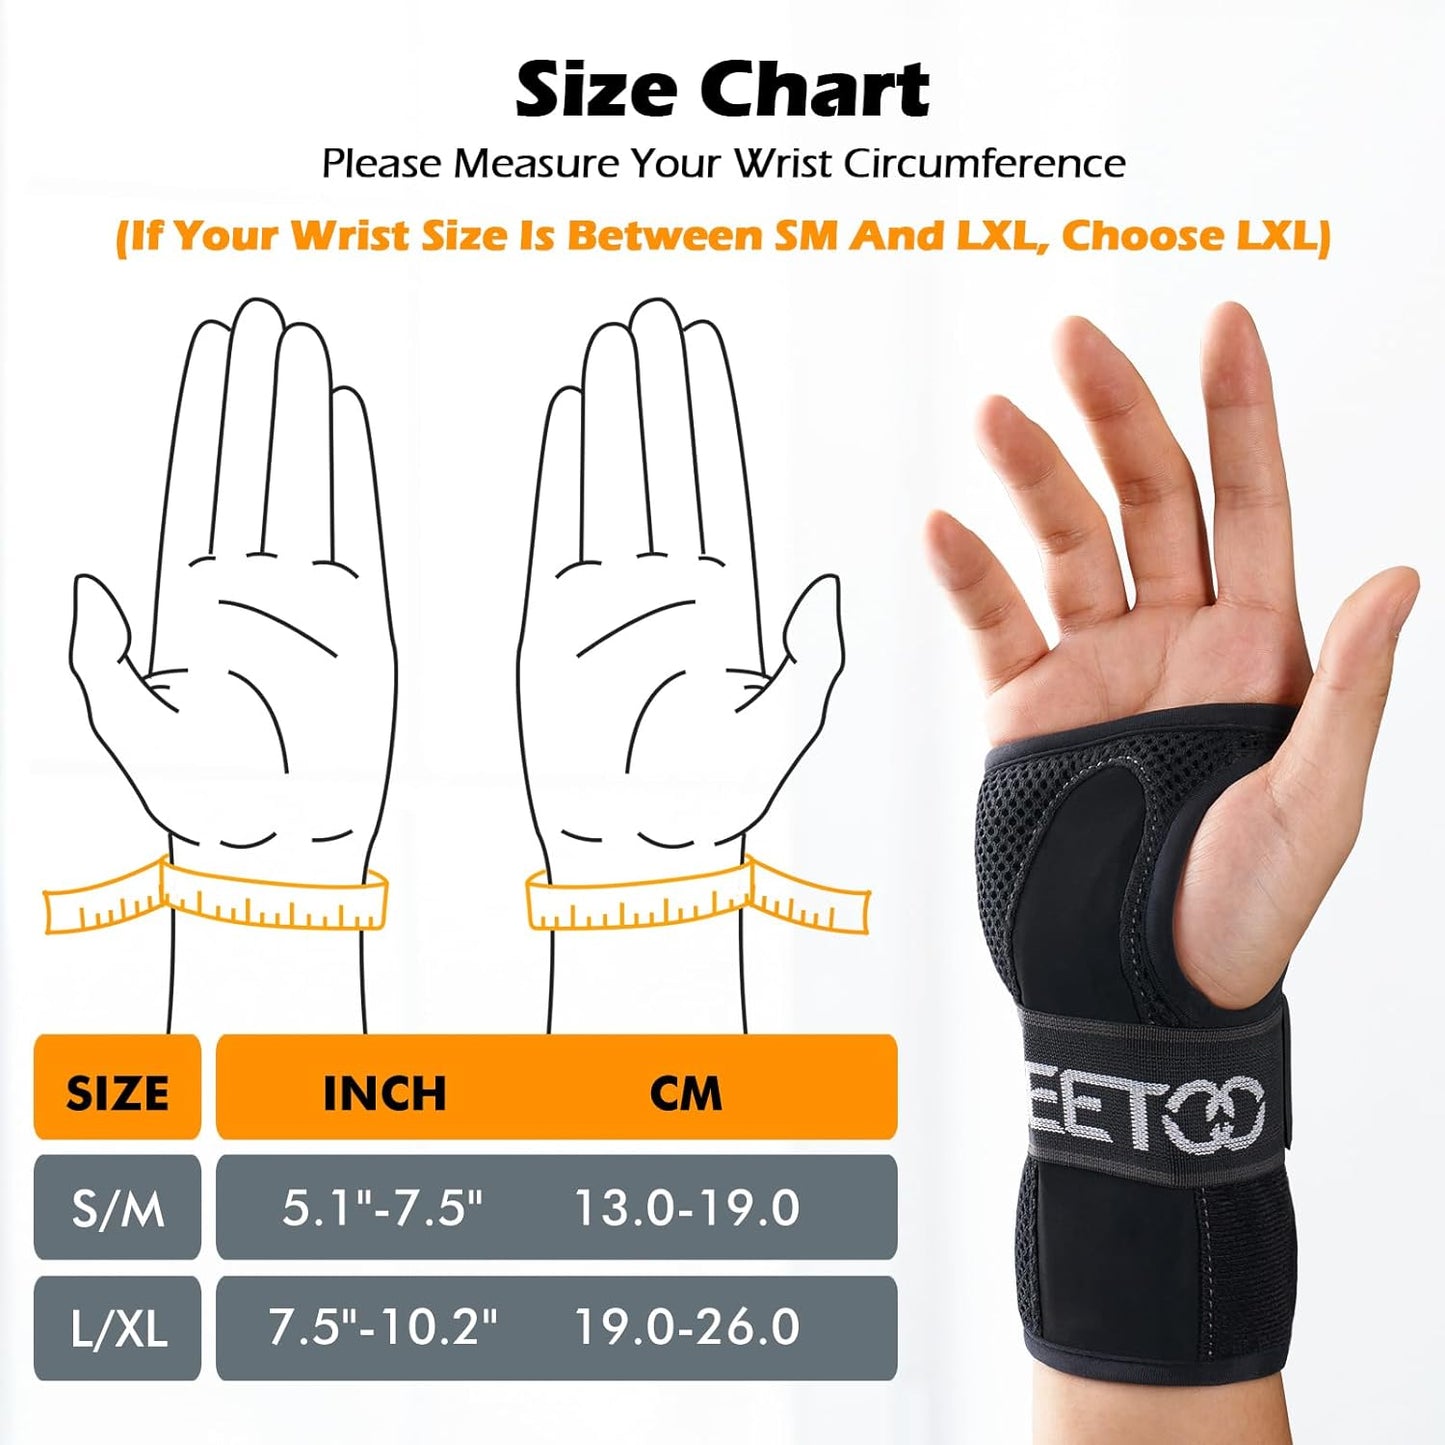 Stable Version Wrist Support with 3 Metal Stays, Comfy Carpal Tunnel Wrist Splint with Soft Pad for Daily Use, Breathable Wrist Support Brace Fit Right Hand for Arthritis,Rsi,Sprain Recovery